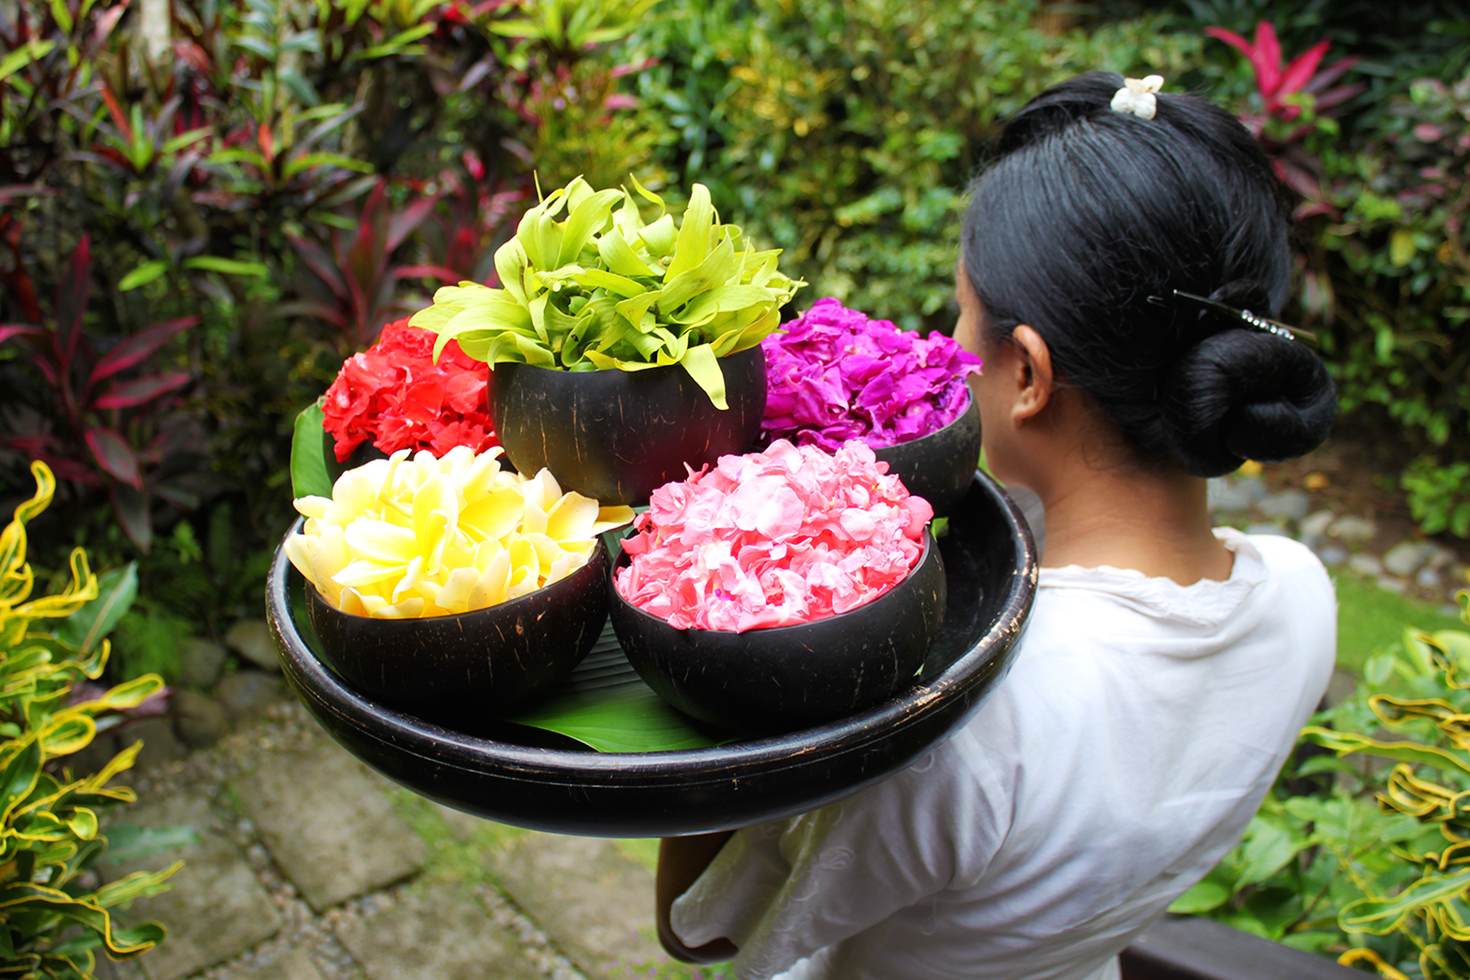 Typical-floral-arrangement-at-Bali-spas.-Image-by-Samantha-Chalker-Lonely-Planet